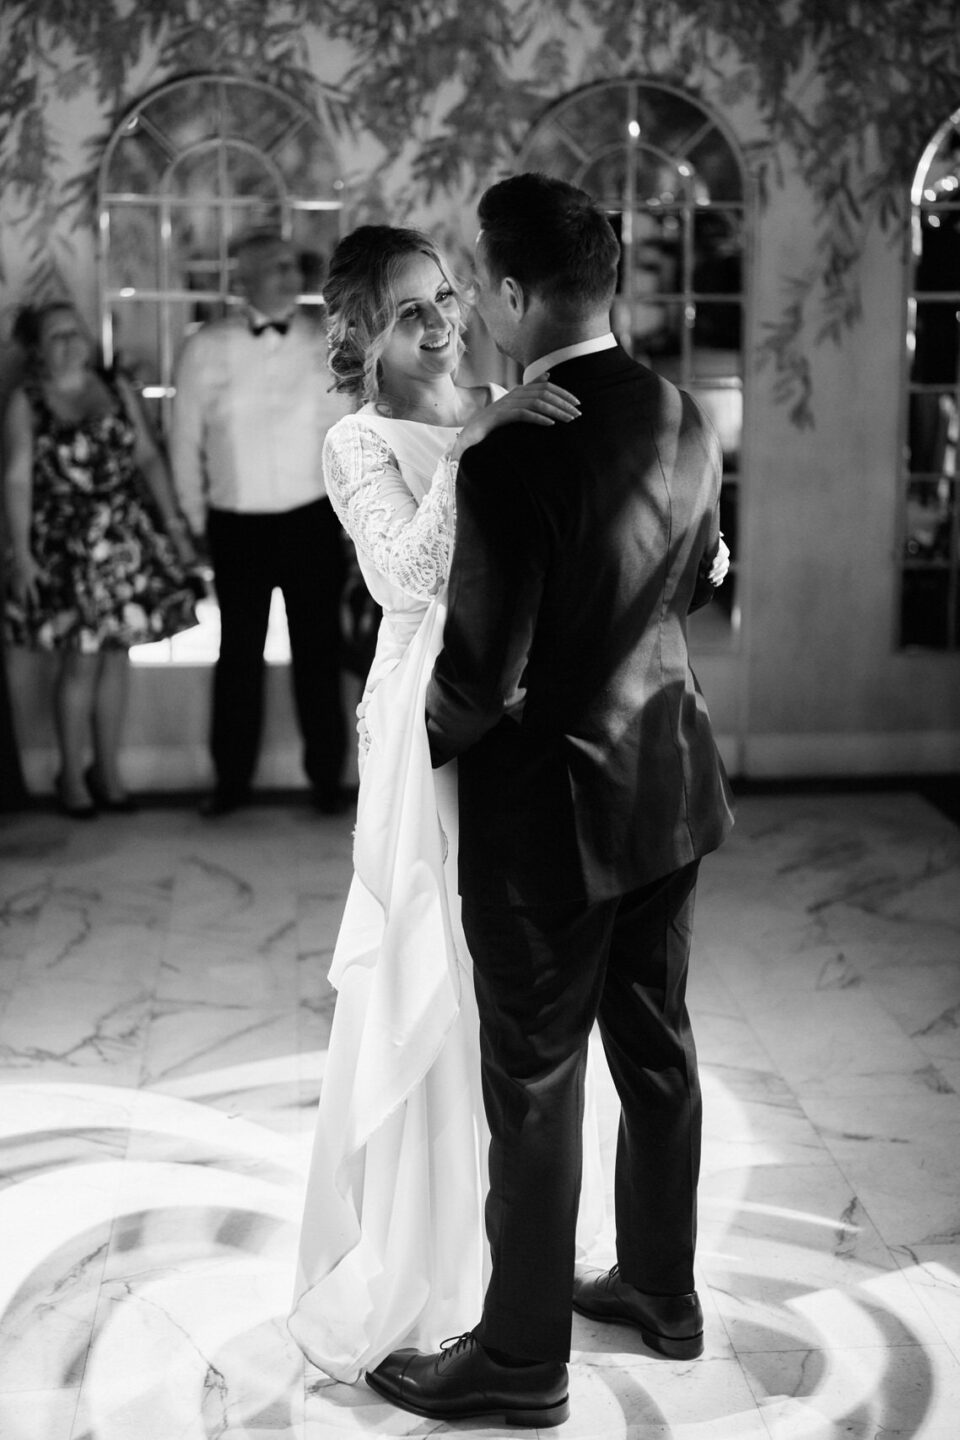 A couple having their first dance after getting married.